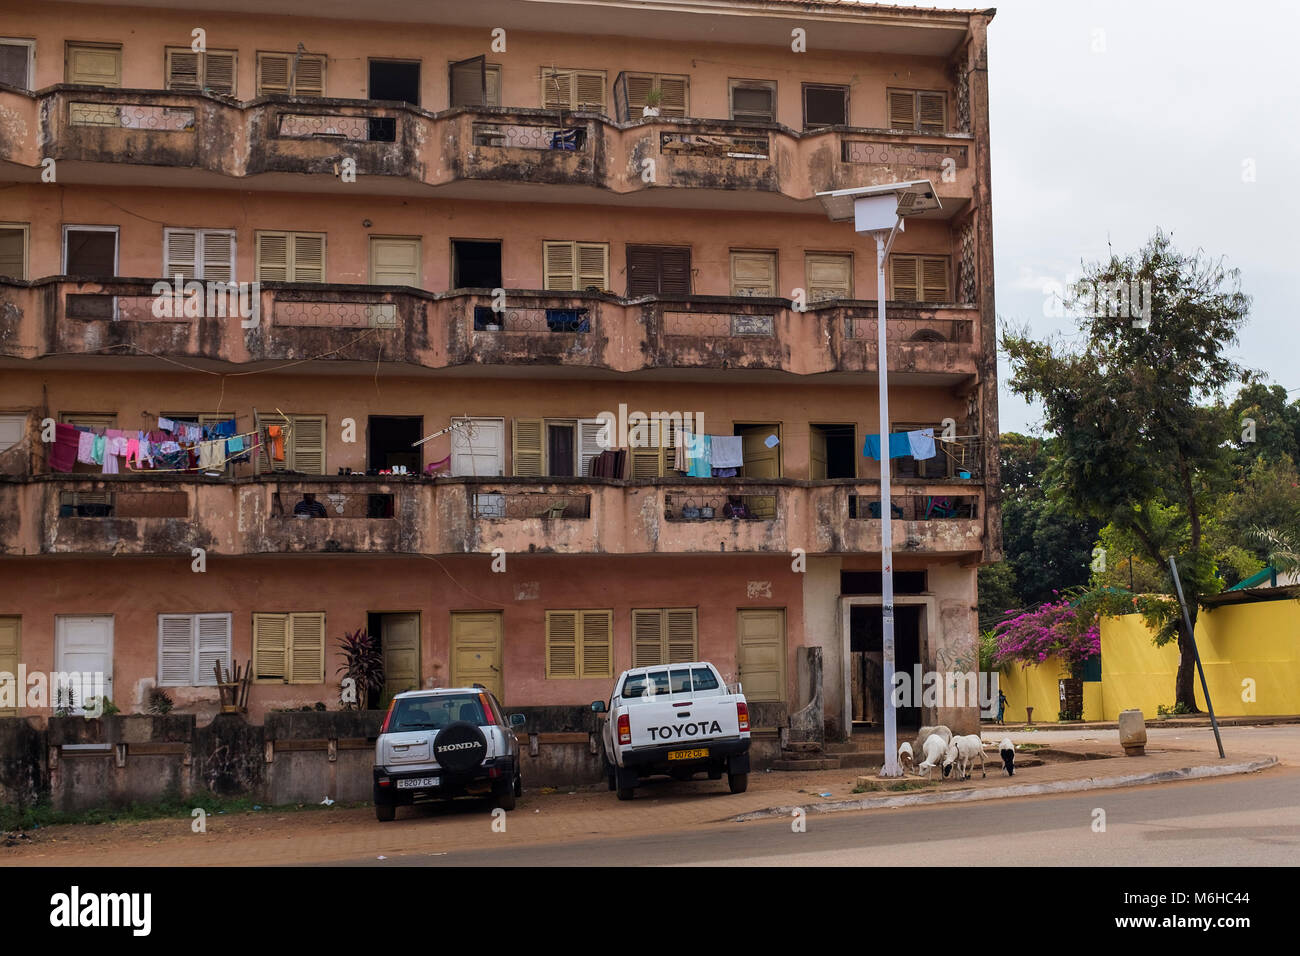 Bissau, Republic of Guinea-Bissau - January 28, 2018: An old and crumbling apartment building with goats at its entrance in the city of Bissau, Republ Stock Photo